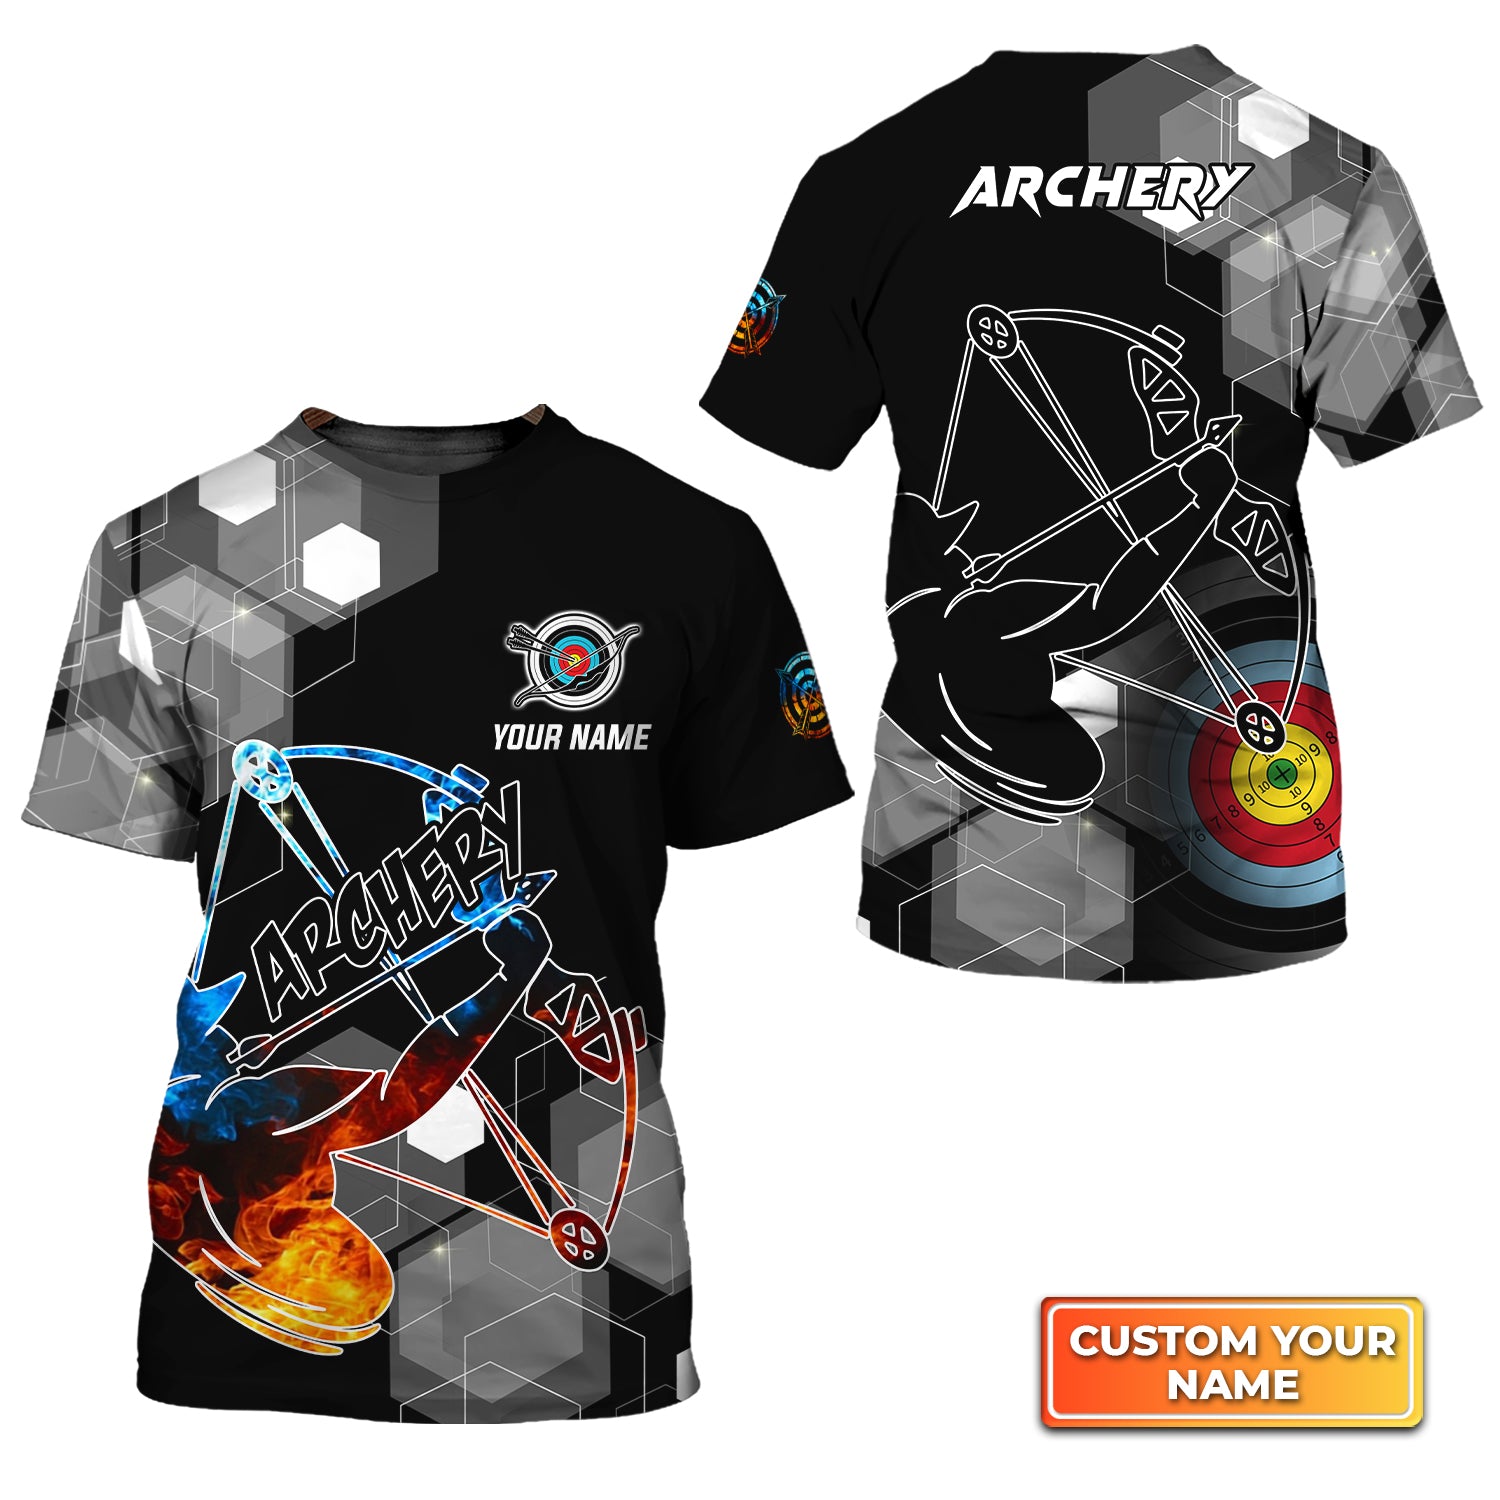 Archery Summer Short Sleeve Shirts Personalized Name 3D Target Bow T-Shirt QB95 Gift For Archer Sport Lovers